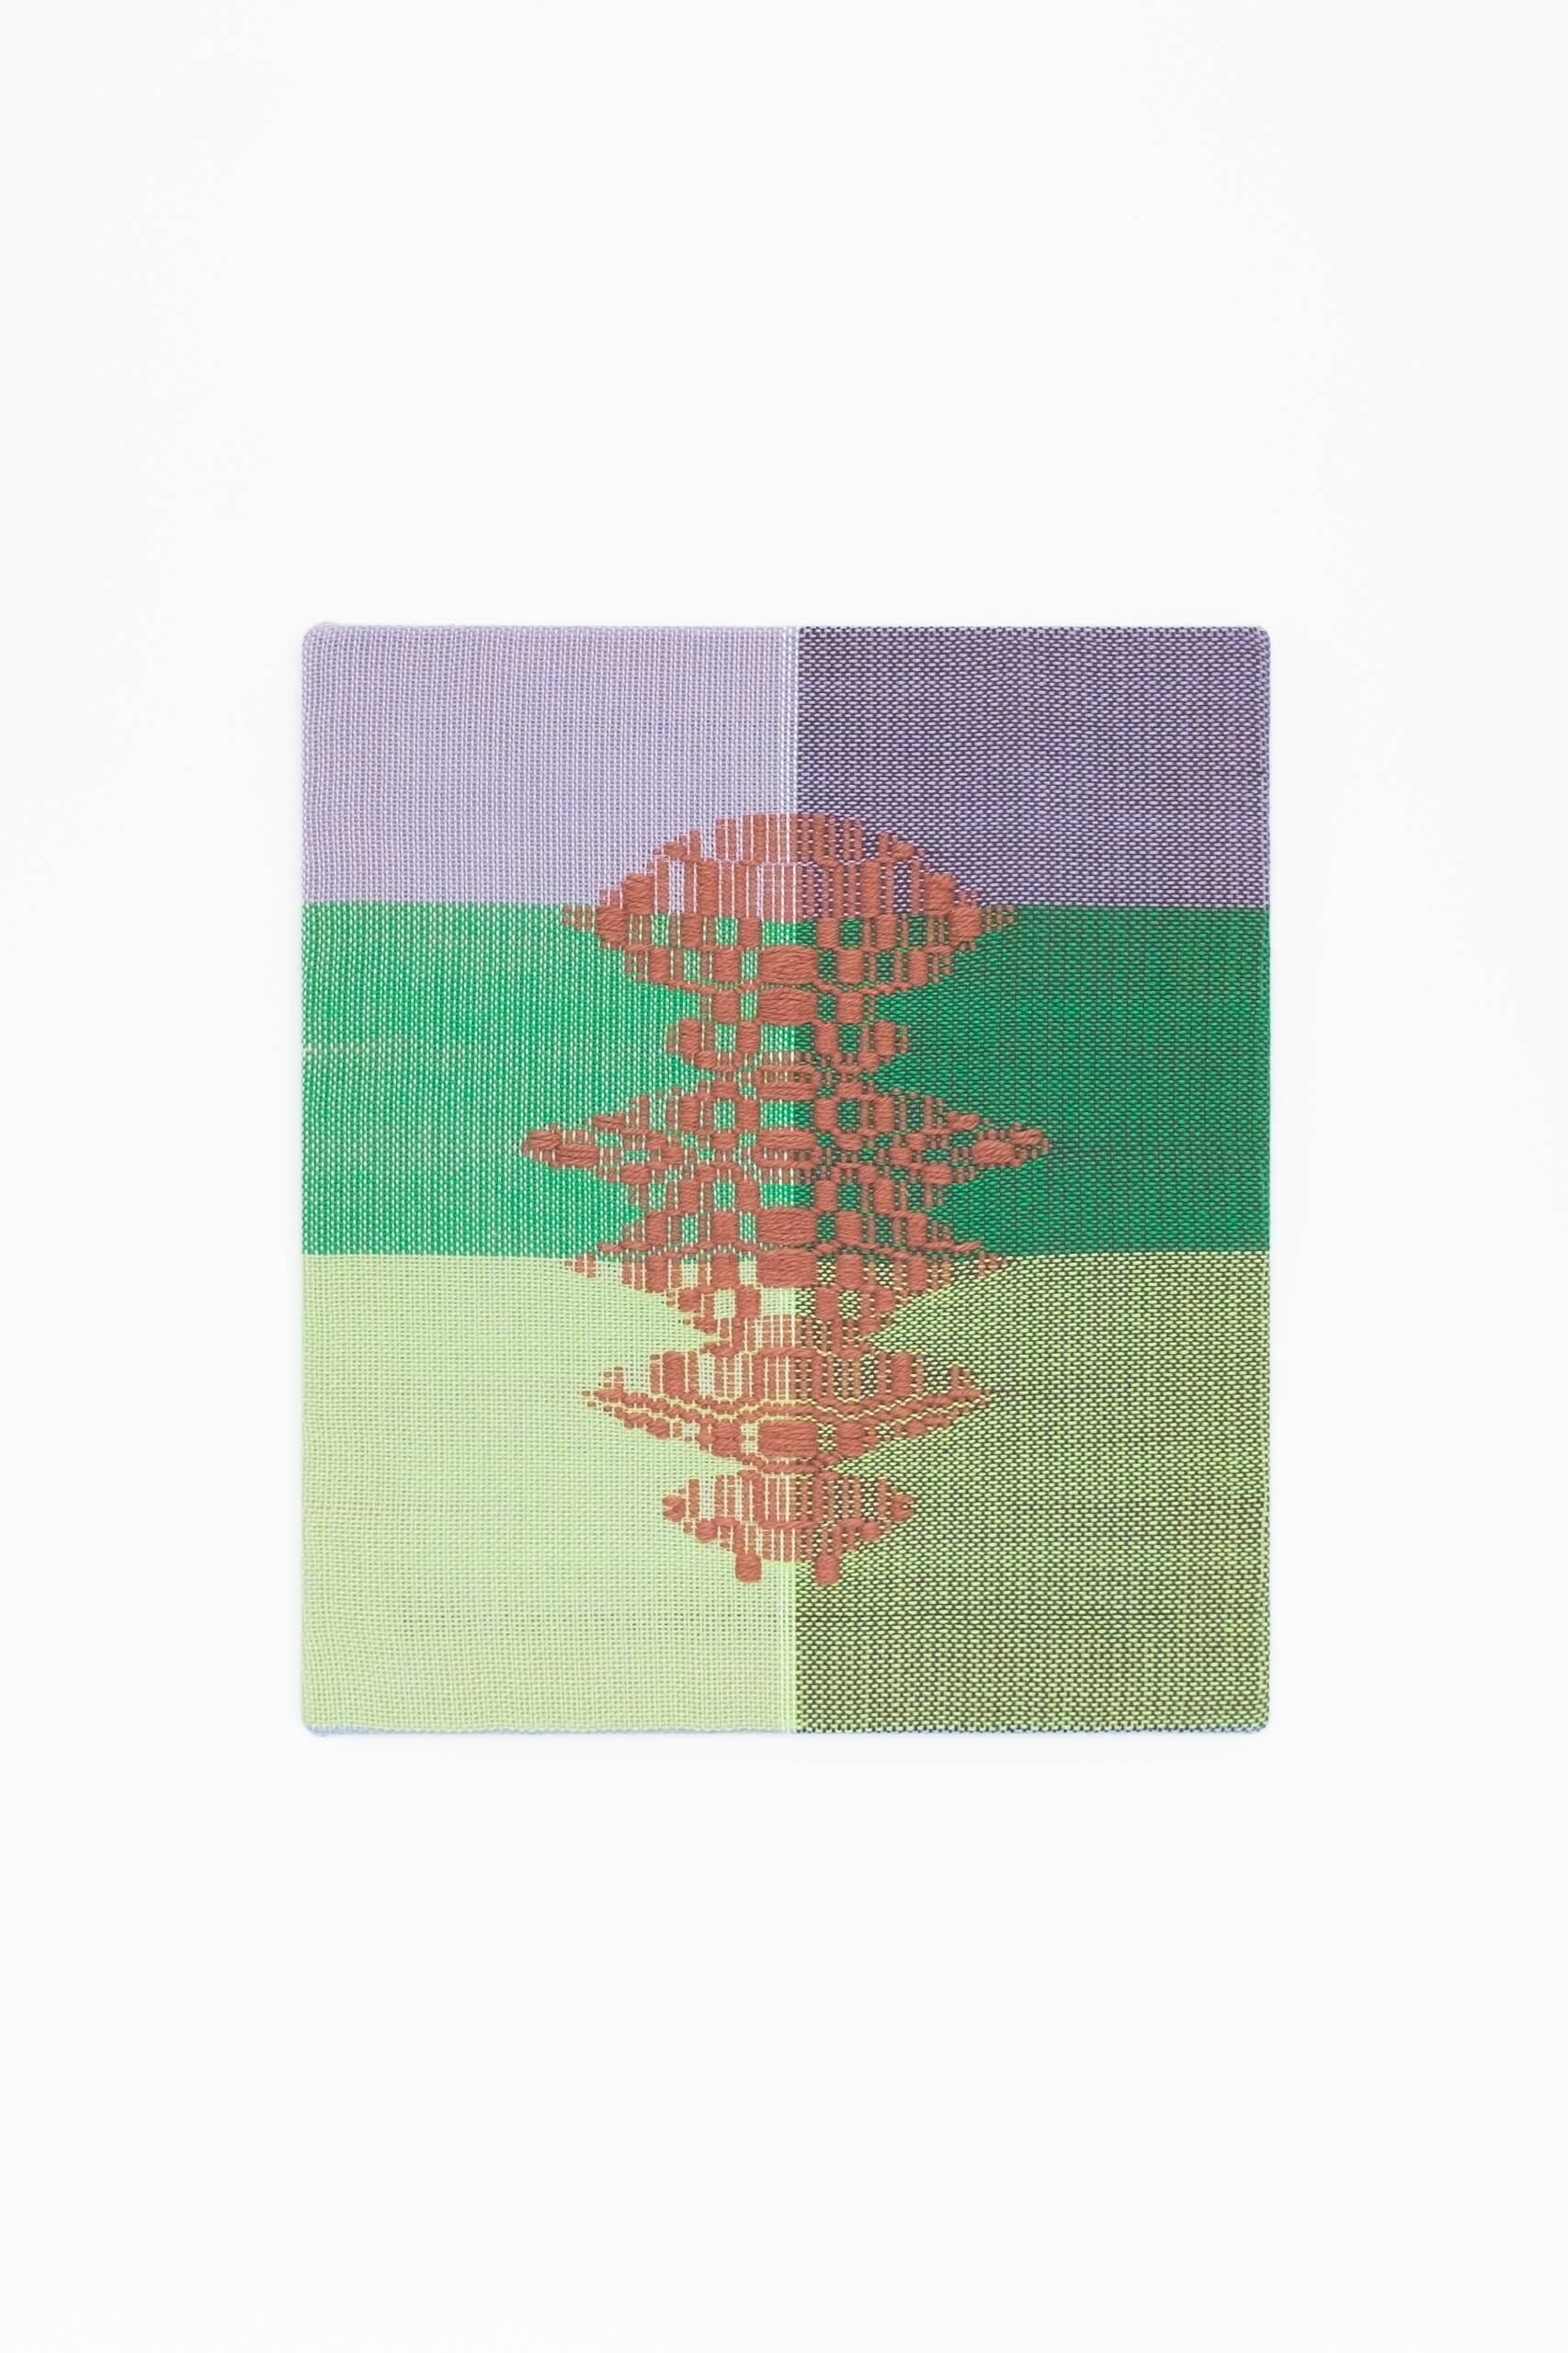 Solitary being [brick], Handwoven cotton and wool yarn, 2022